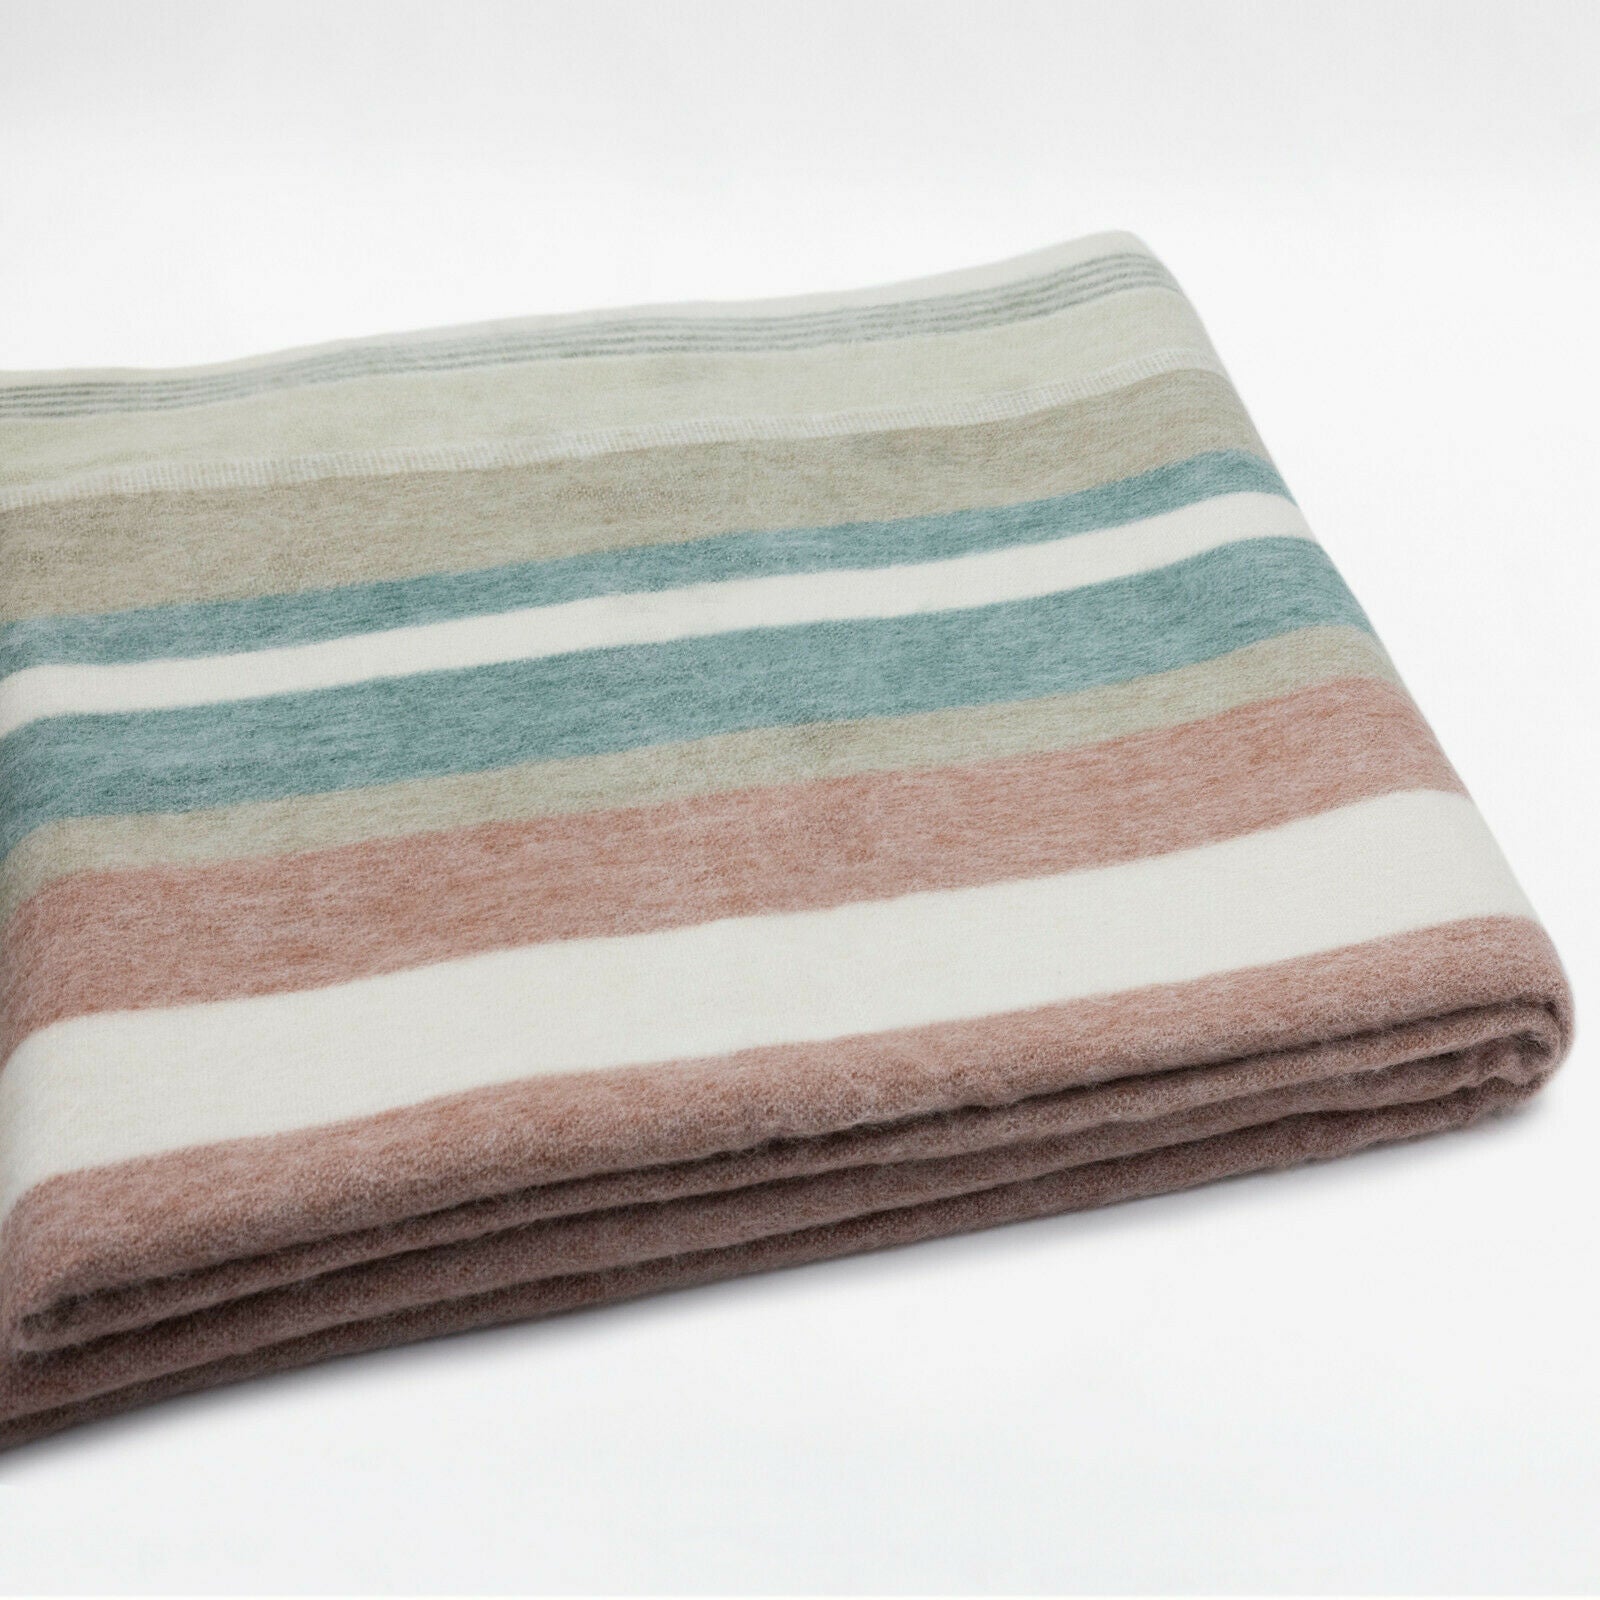 Timbara - Baby Alpaca Wool Throw Blanket / Sofa Cover - Queen 97" x 67" - dull pastel coloured stripes pattern